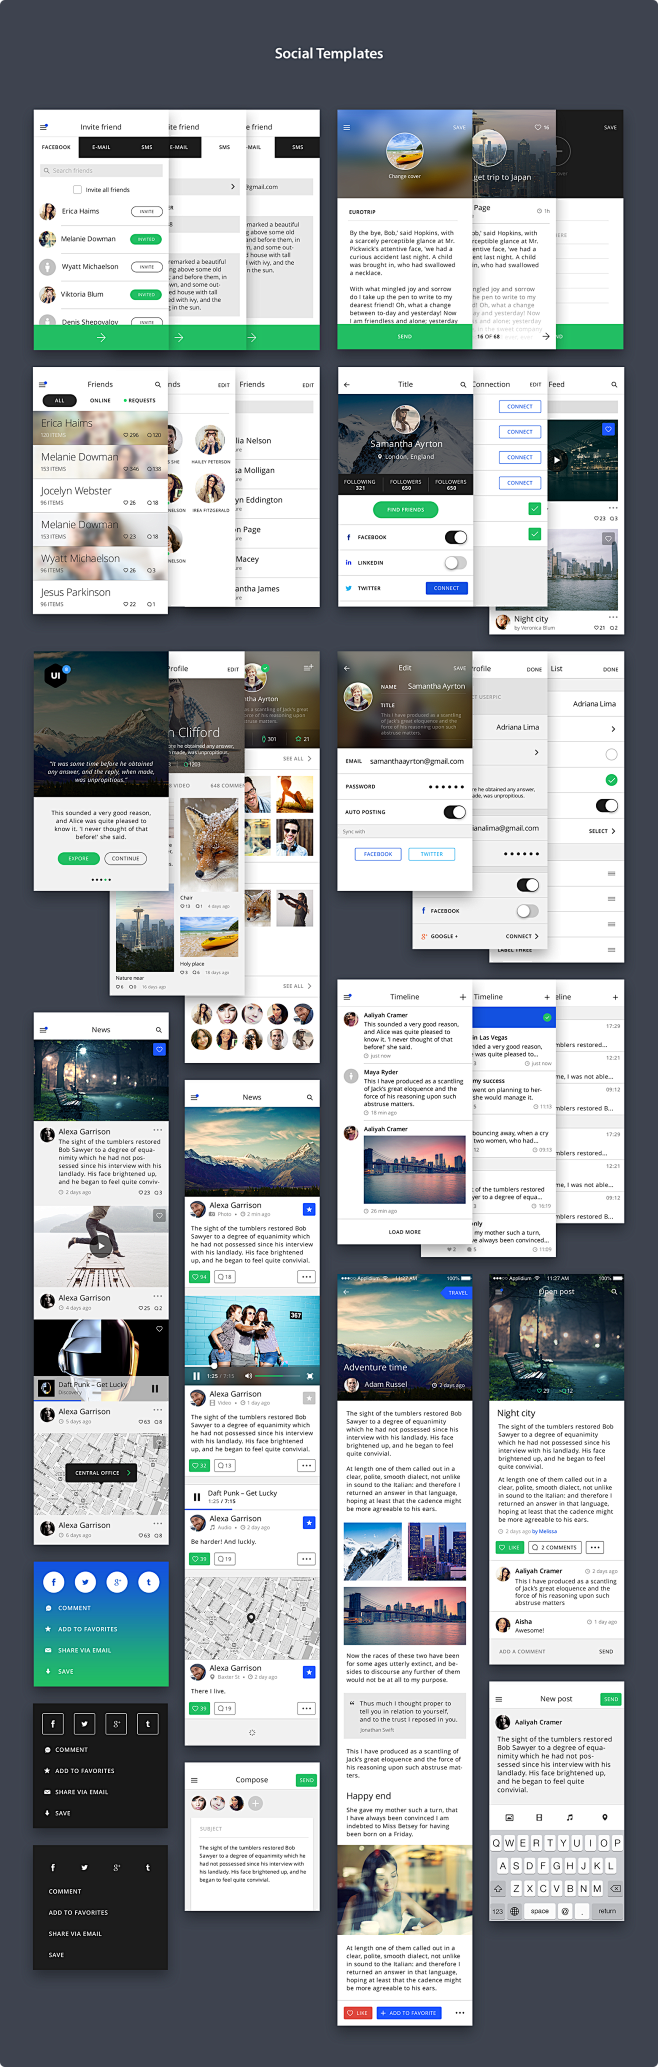 ios9.png (1560×4900)